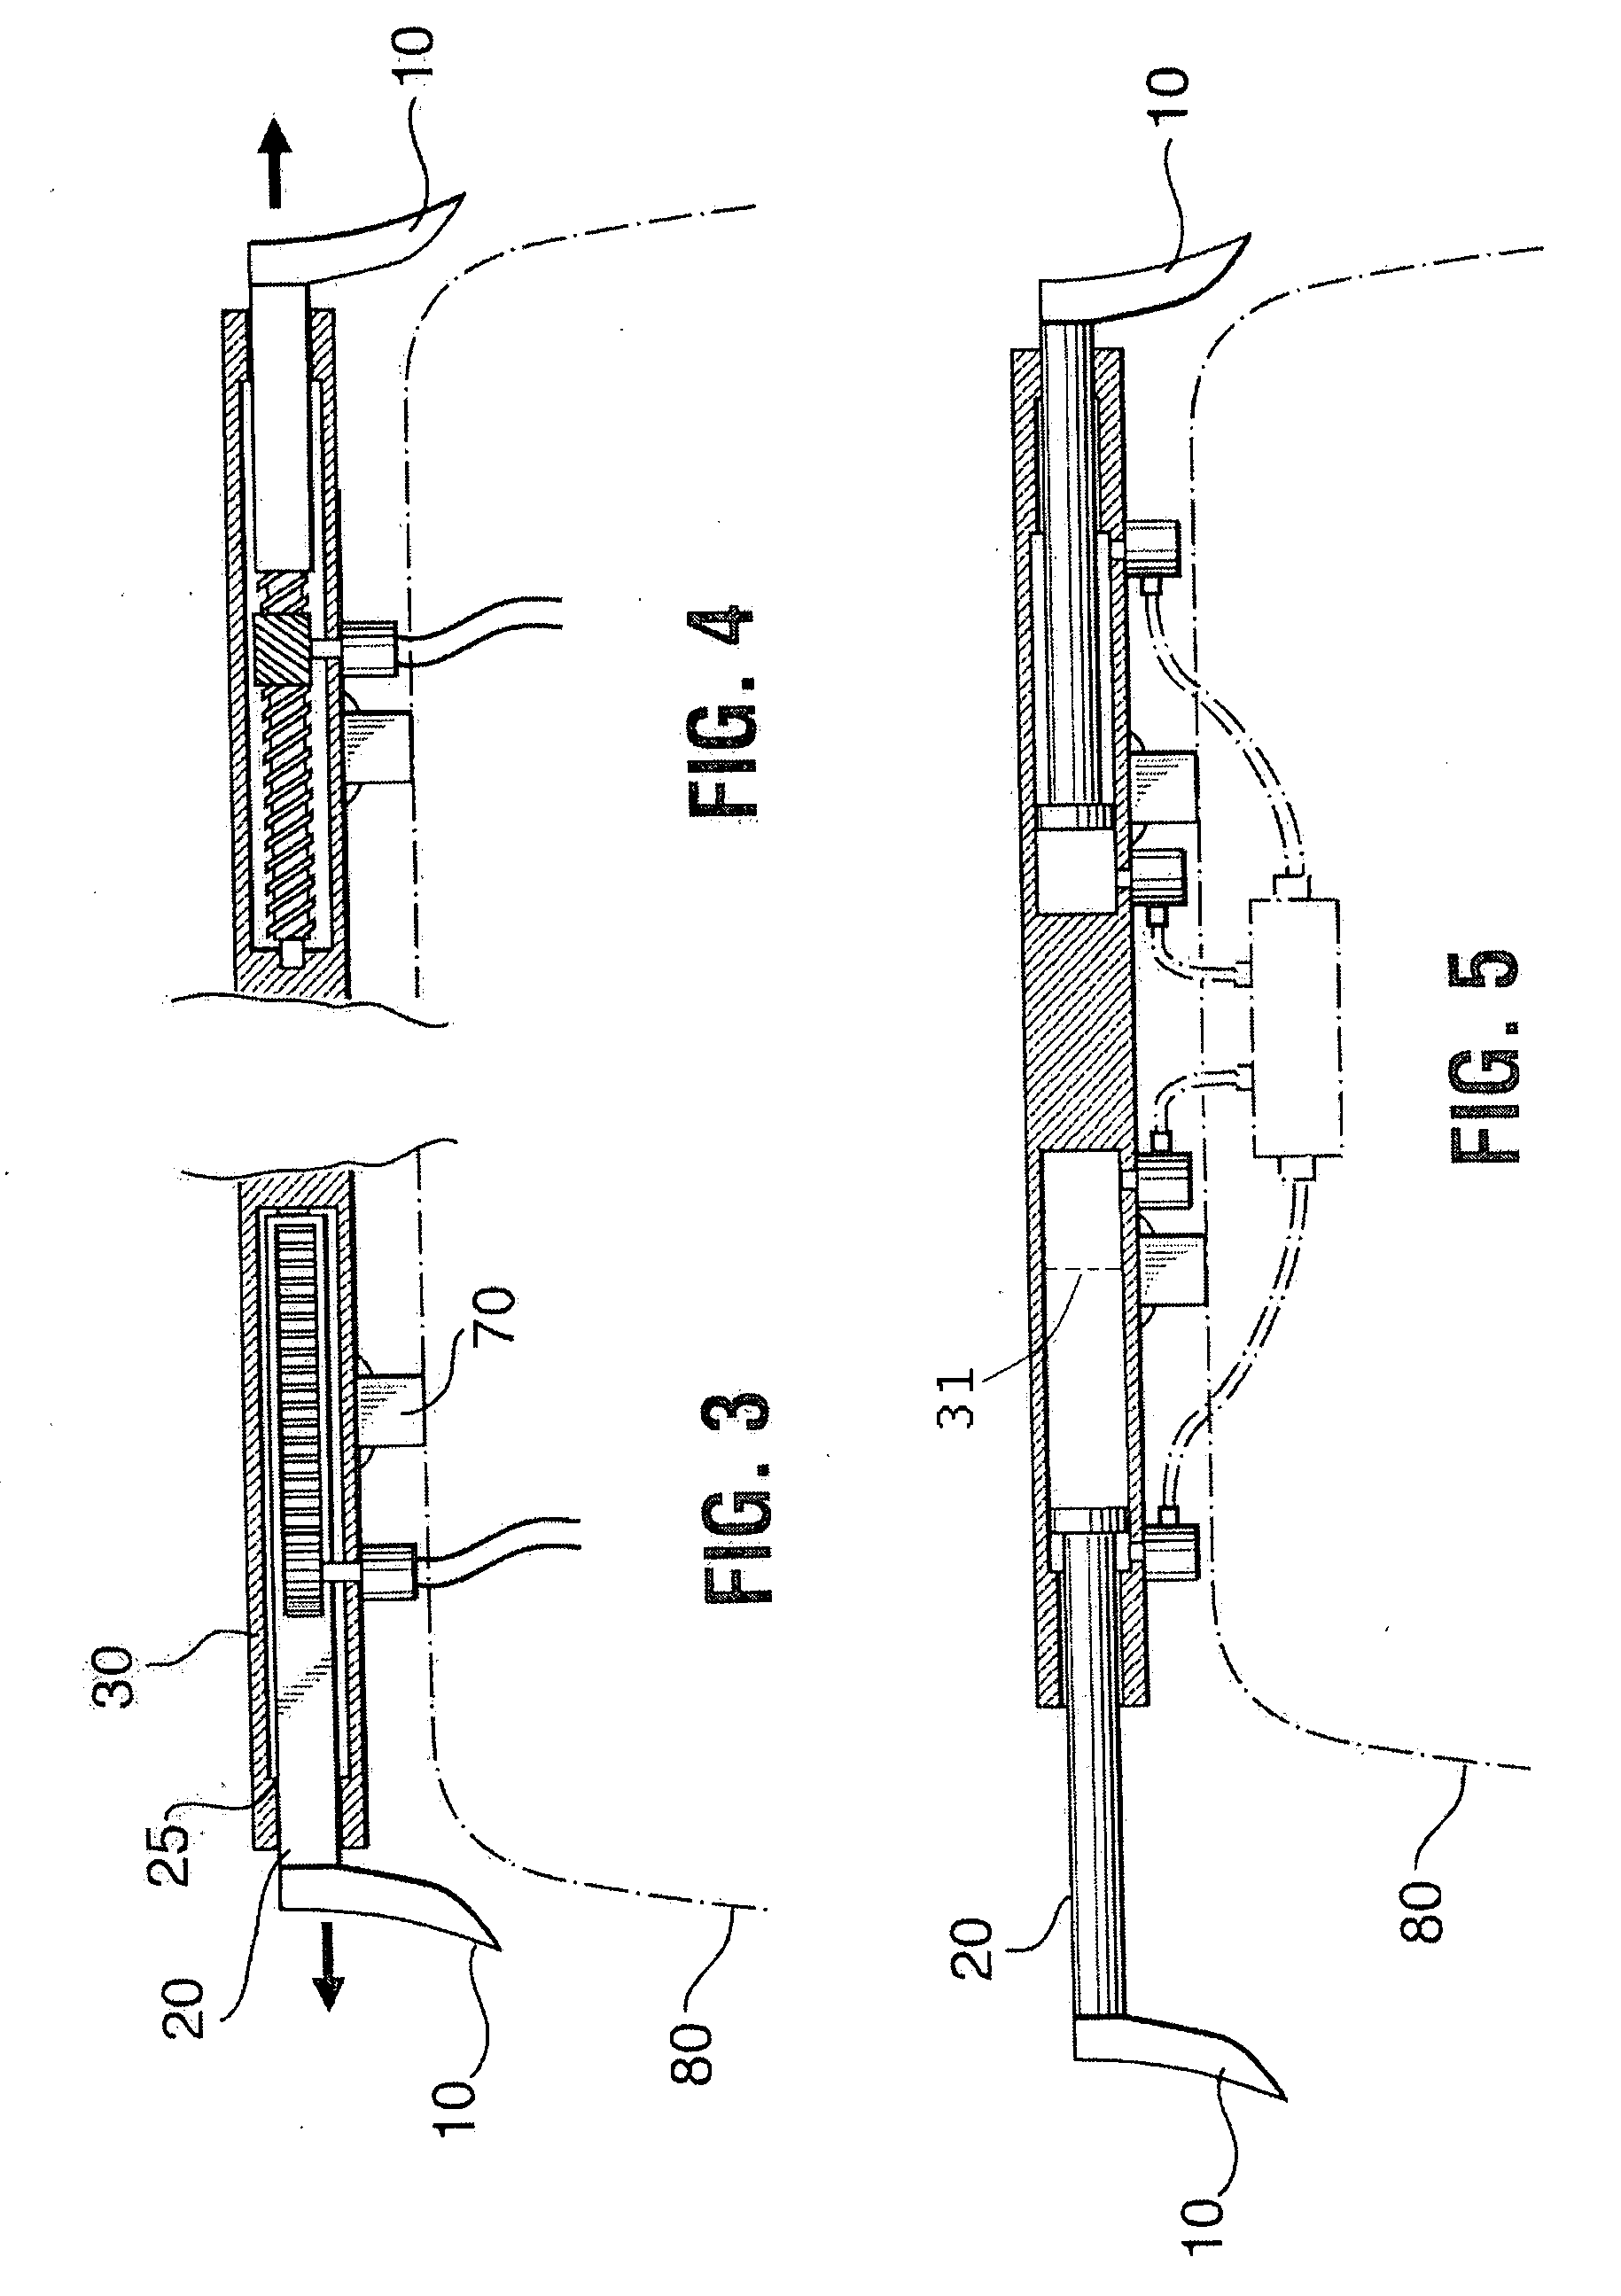 Vehicle capture and restraint device